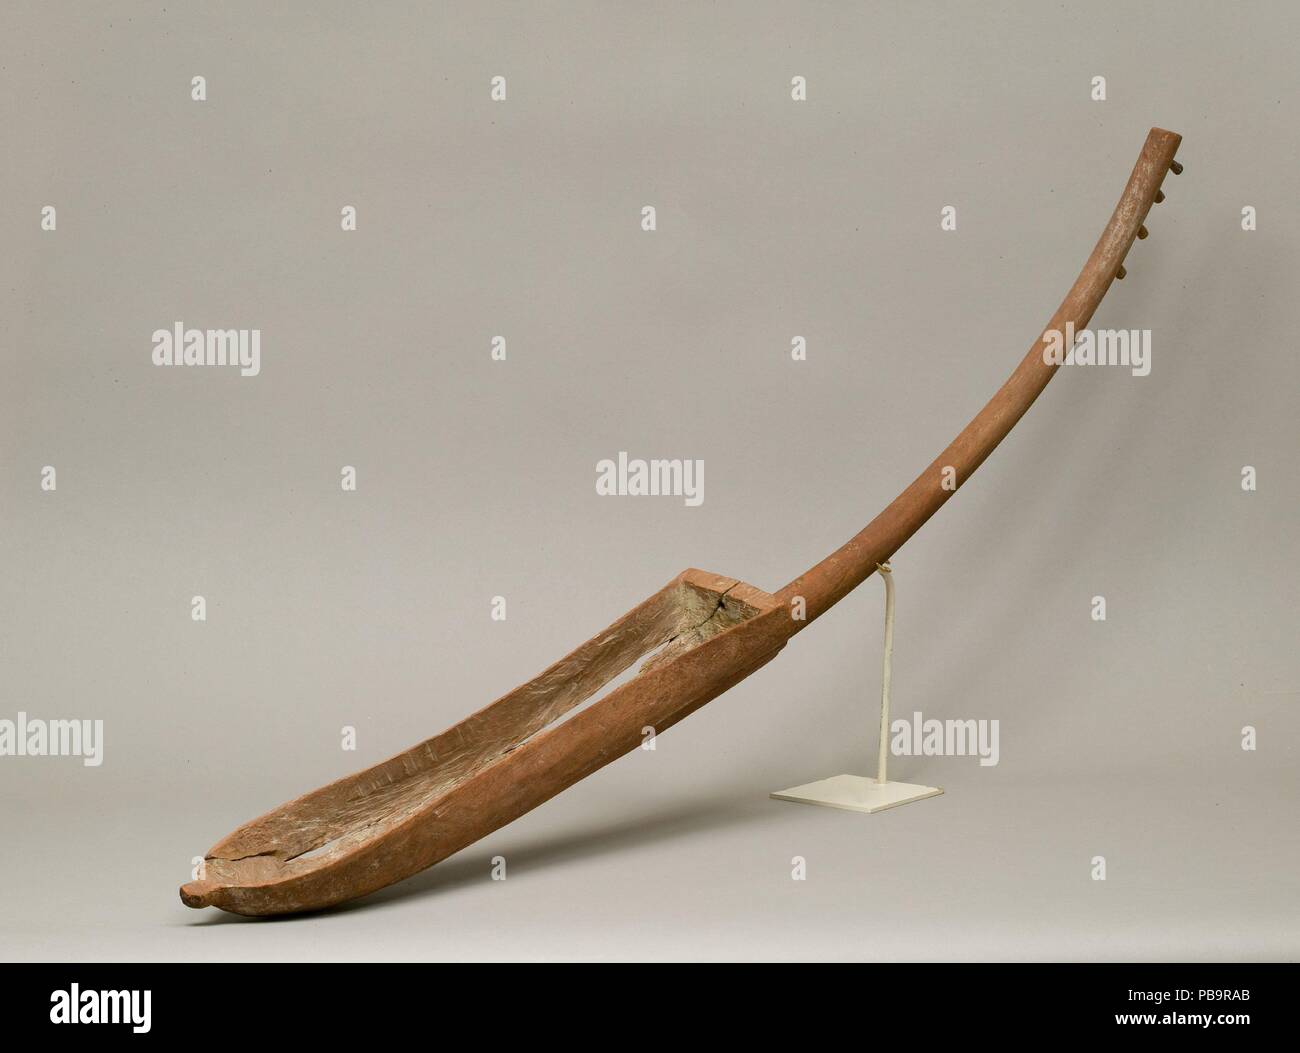 Harp. Dimensions: l. 110 cm (43 5/16 in). Dynasty: late Dynasty 13-early Dynasty 18. Date: ca. 1700-1450 B.C..  Arched harps of this type were already in use during the Old Kingdom and remained the foremost string instruments until the end of the Middle Kingdom. From the New Kingdom onward, Egyptian arched harps co-existed with a great variety of harps in different shapes and sizes. Unlike modern European versions, ancient Egyptian harps have no forepillar to strengthen and support the neck.  Skin, now missing, covered the open top of the soundbox. Older forms of arched harps like this had fou Stock Photo